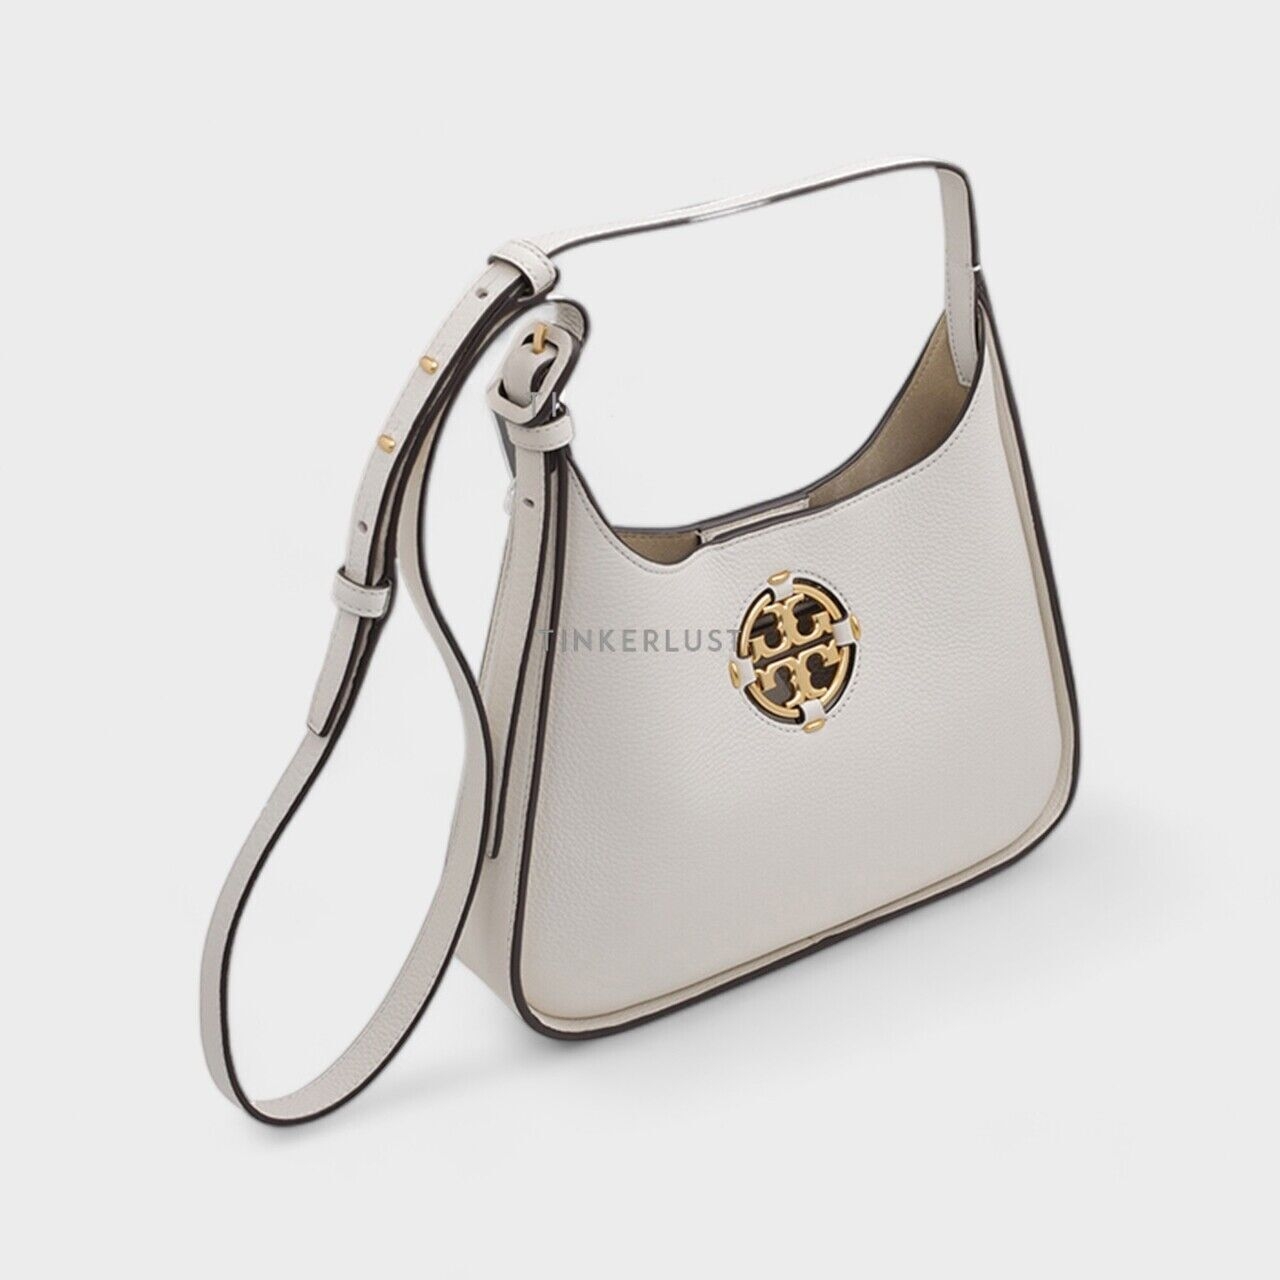 Tory Burch Small Miller Classic in New Ivory Shoulder Bag